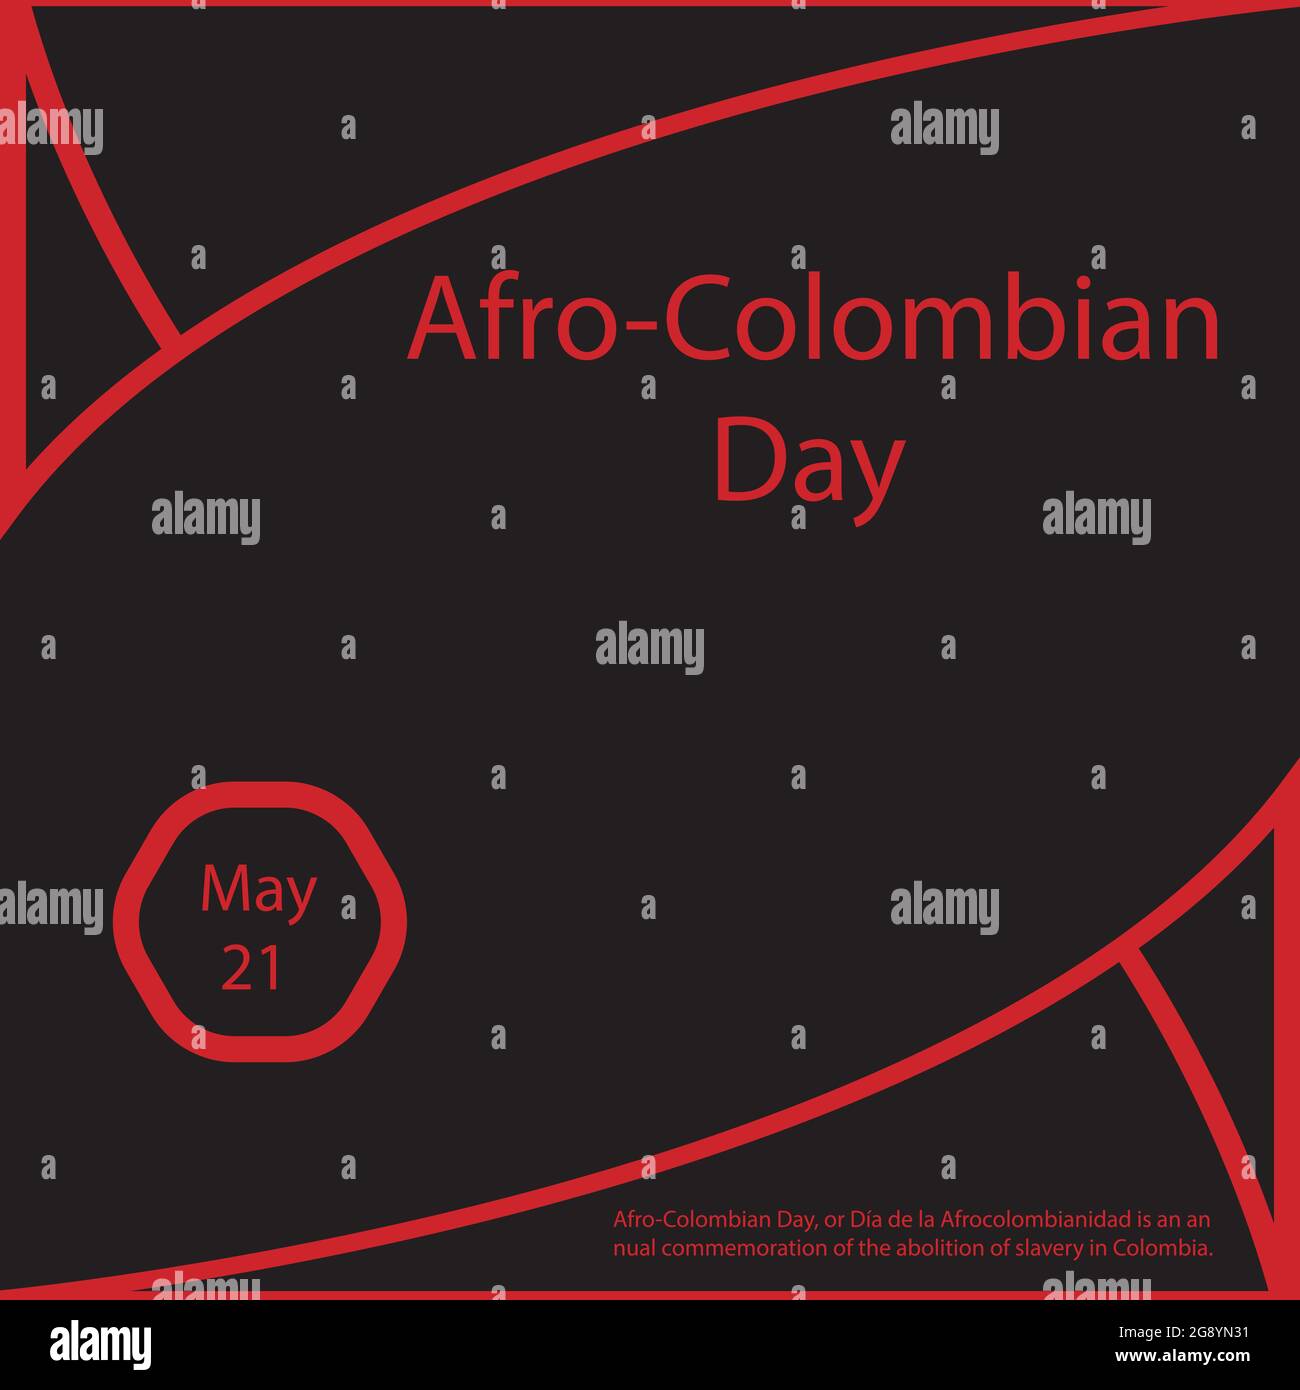 Afro-Colombian Day, or Día de la Afrocolombianidad is an annual commemoration of the abolition of slavery in Colombia. Stock Vector